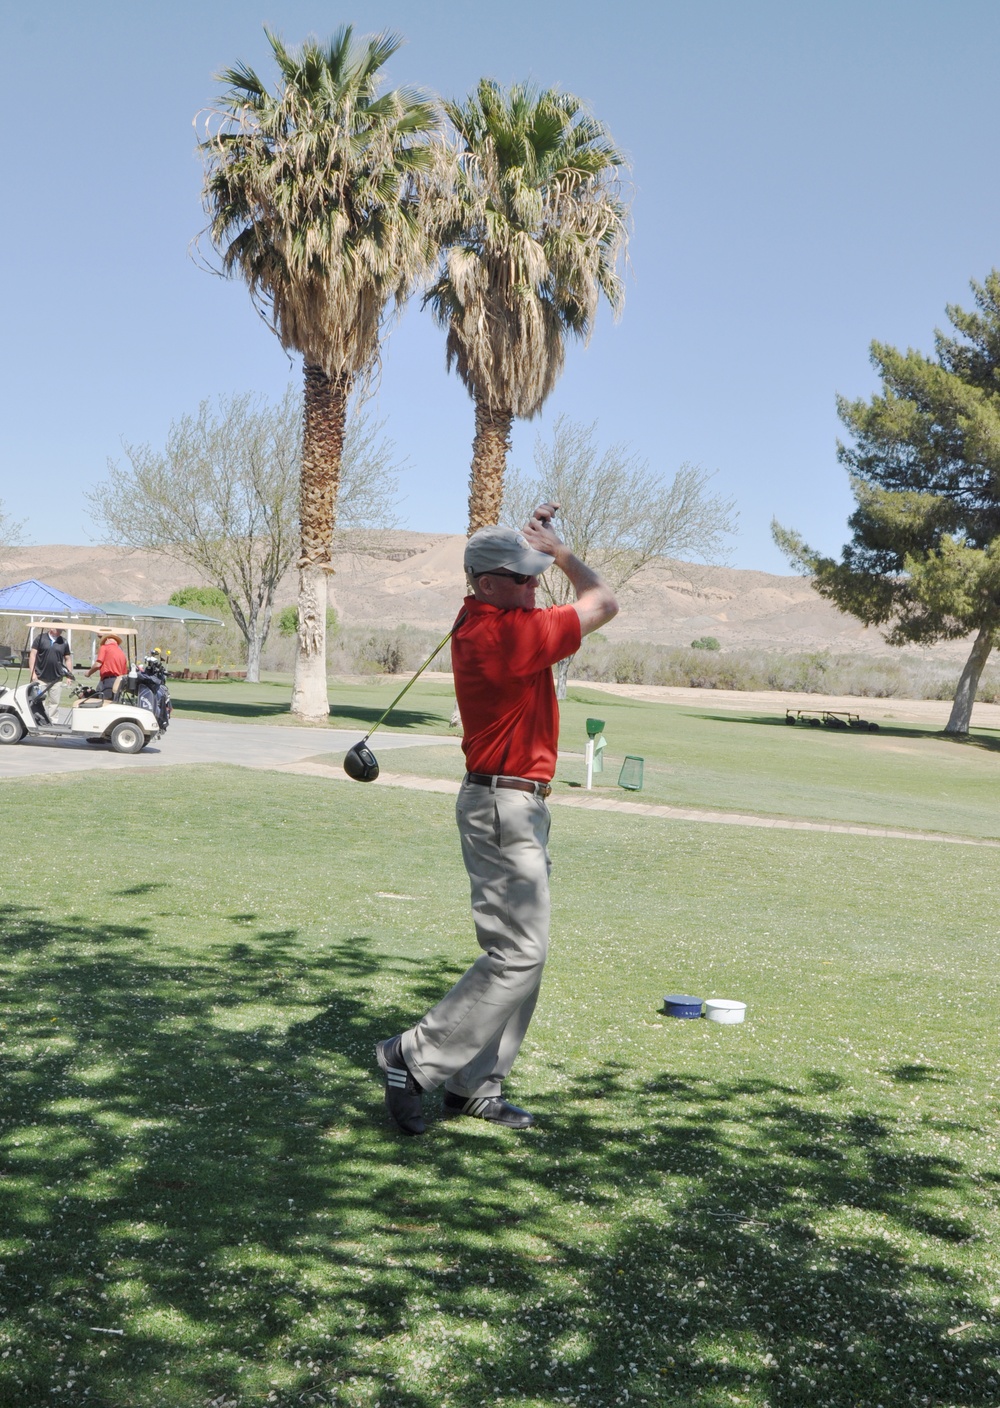 Brig. Gen. Edward D. Banta takes aim during the Commander's Cup Golf Tournament aboard MCLB Barstow